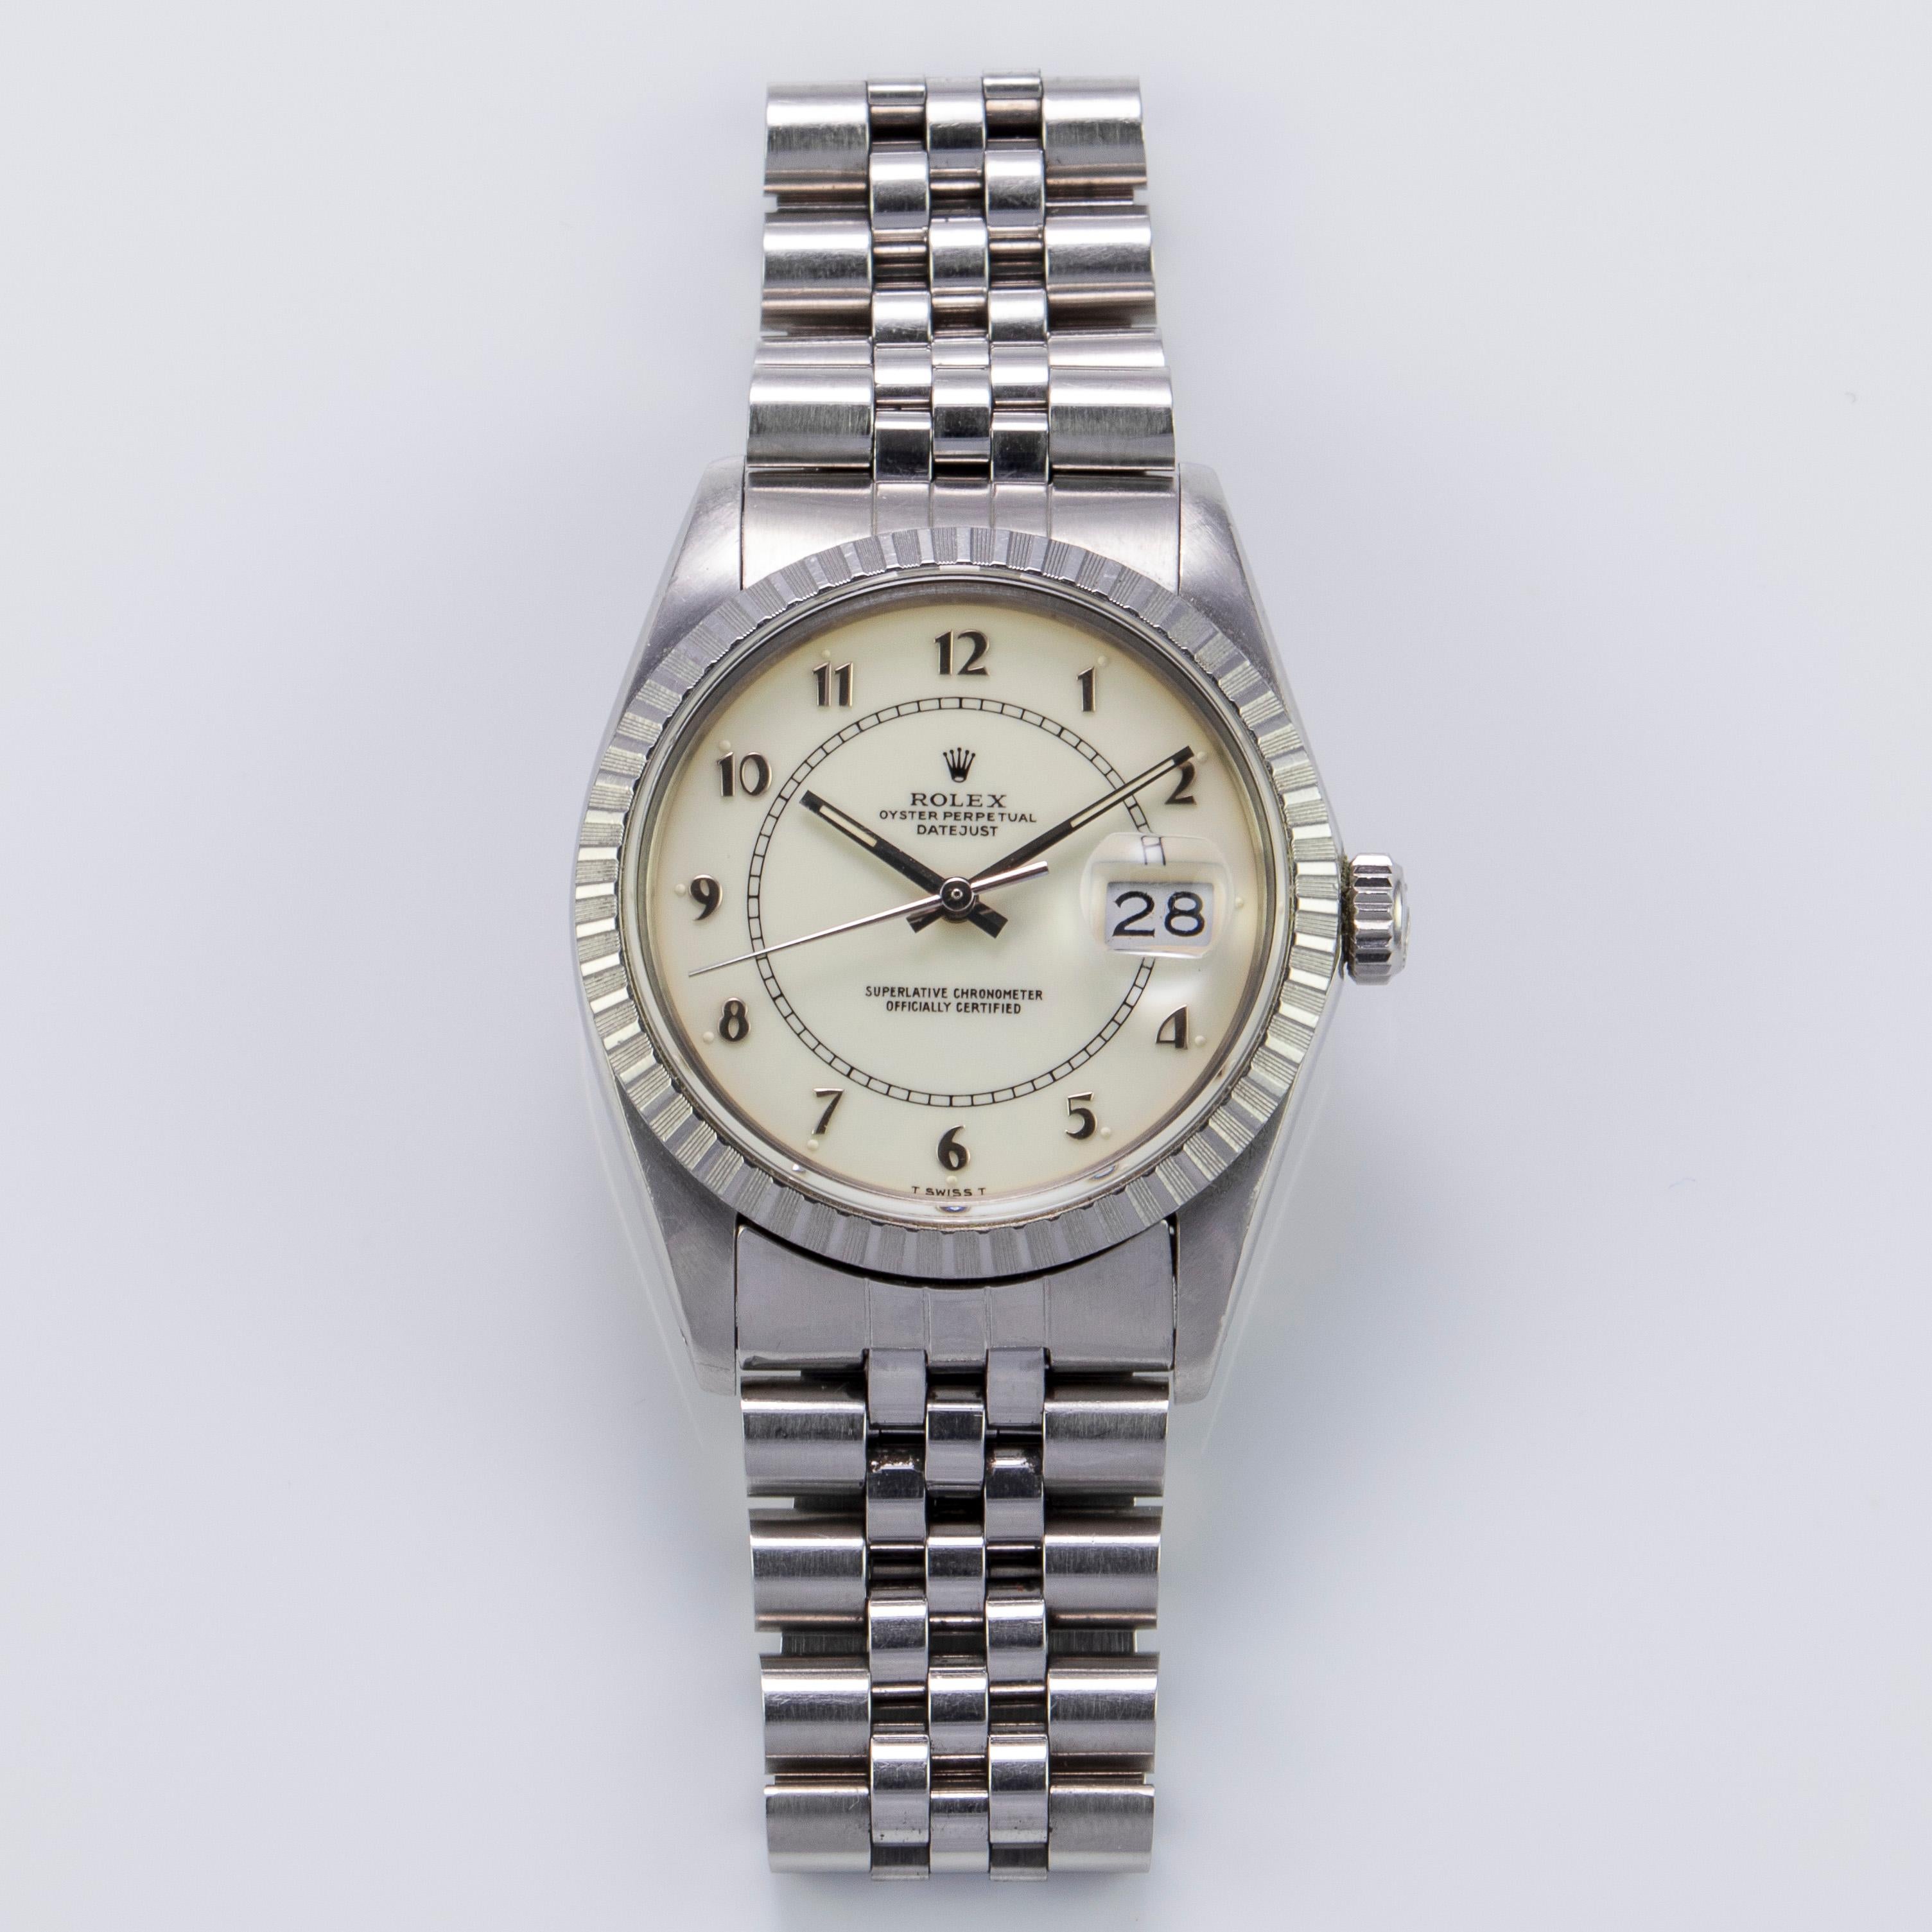 Rolex Stainless Steel and White Gold Oyster Perpetual Datejust Watch
Extremely Rare Eggshell Enamel Boiler Gauge Dial with Arabic Numerals
White Gold Gold Fluted Bezel
Stainless Steel Case
36mm in size 
Features Rolex Automatic Movement with Calibre